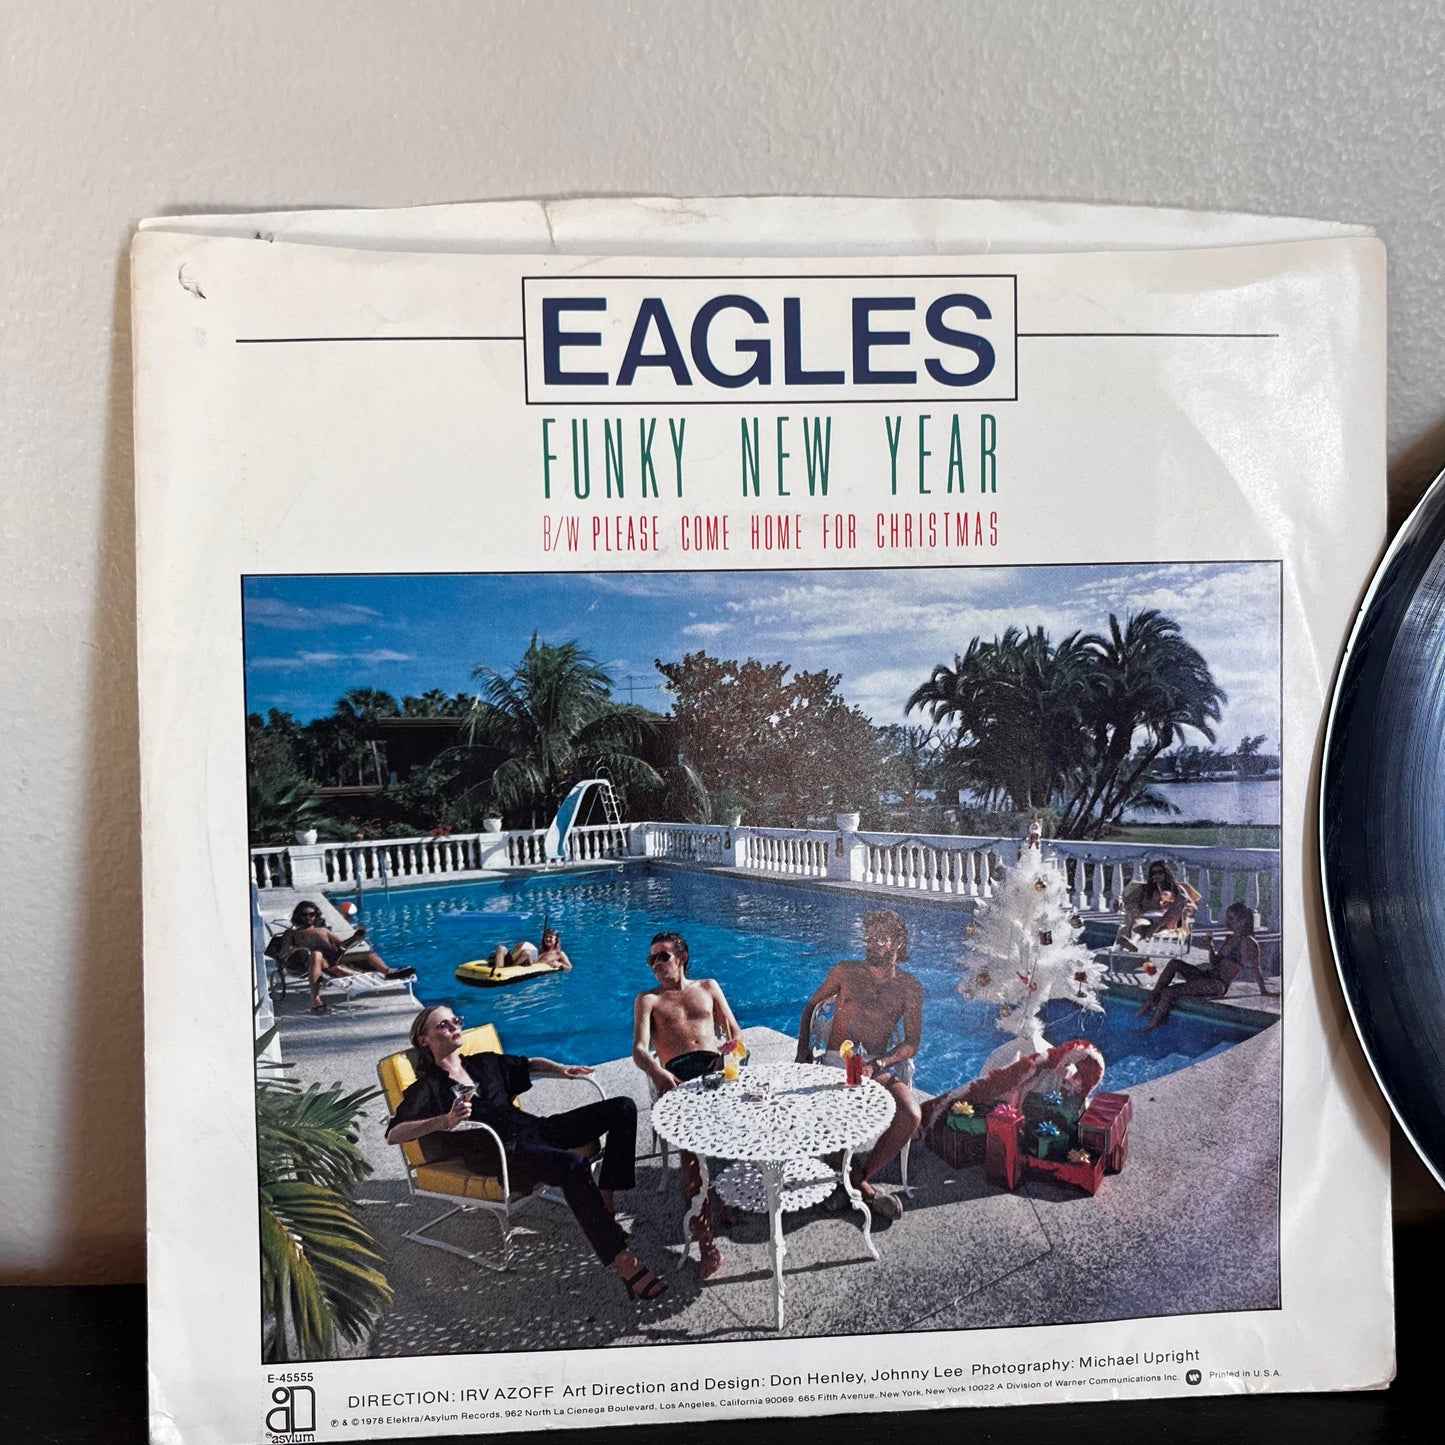 Eagles Please Come Home For Christmas B/W Funky New Year E-45555-A NM